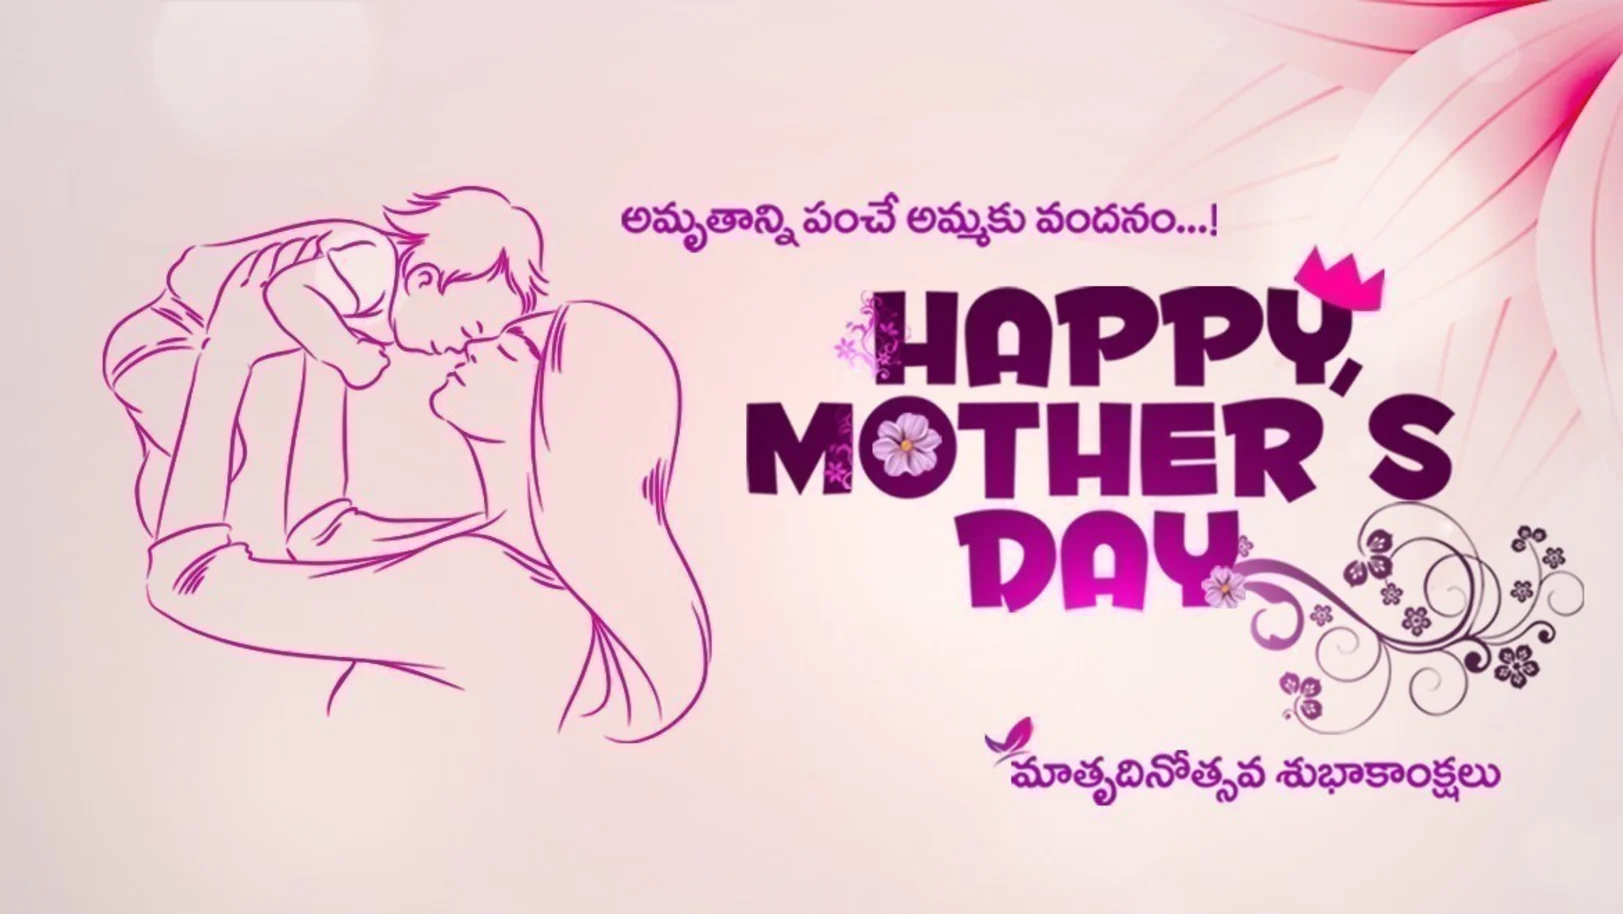 Happy Mother's Day 2019 - Telugu TV Show